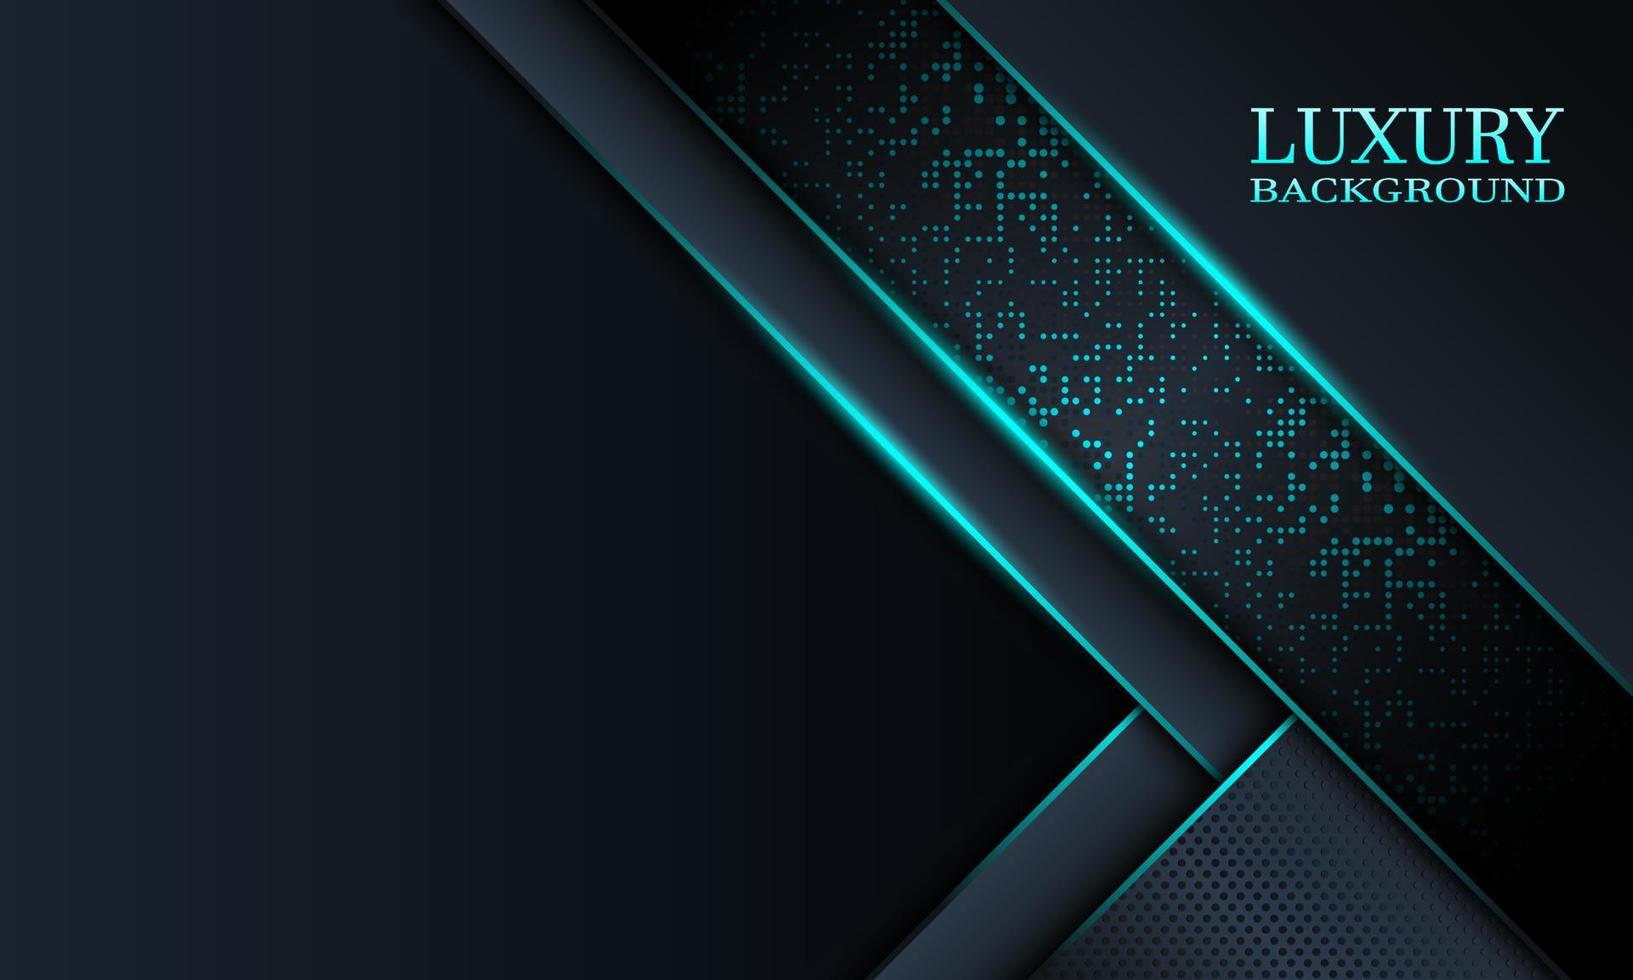 Luxury banner background with dark navy and stripes overlapping layer and blue lines. vector